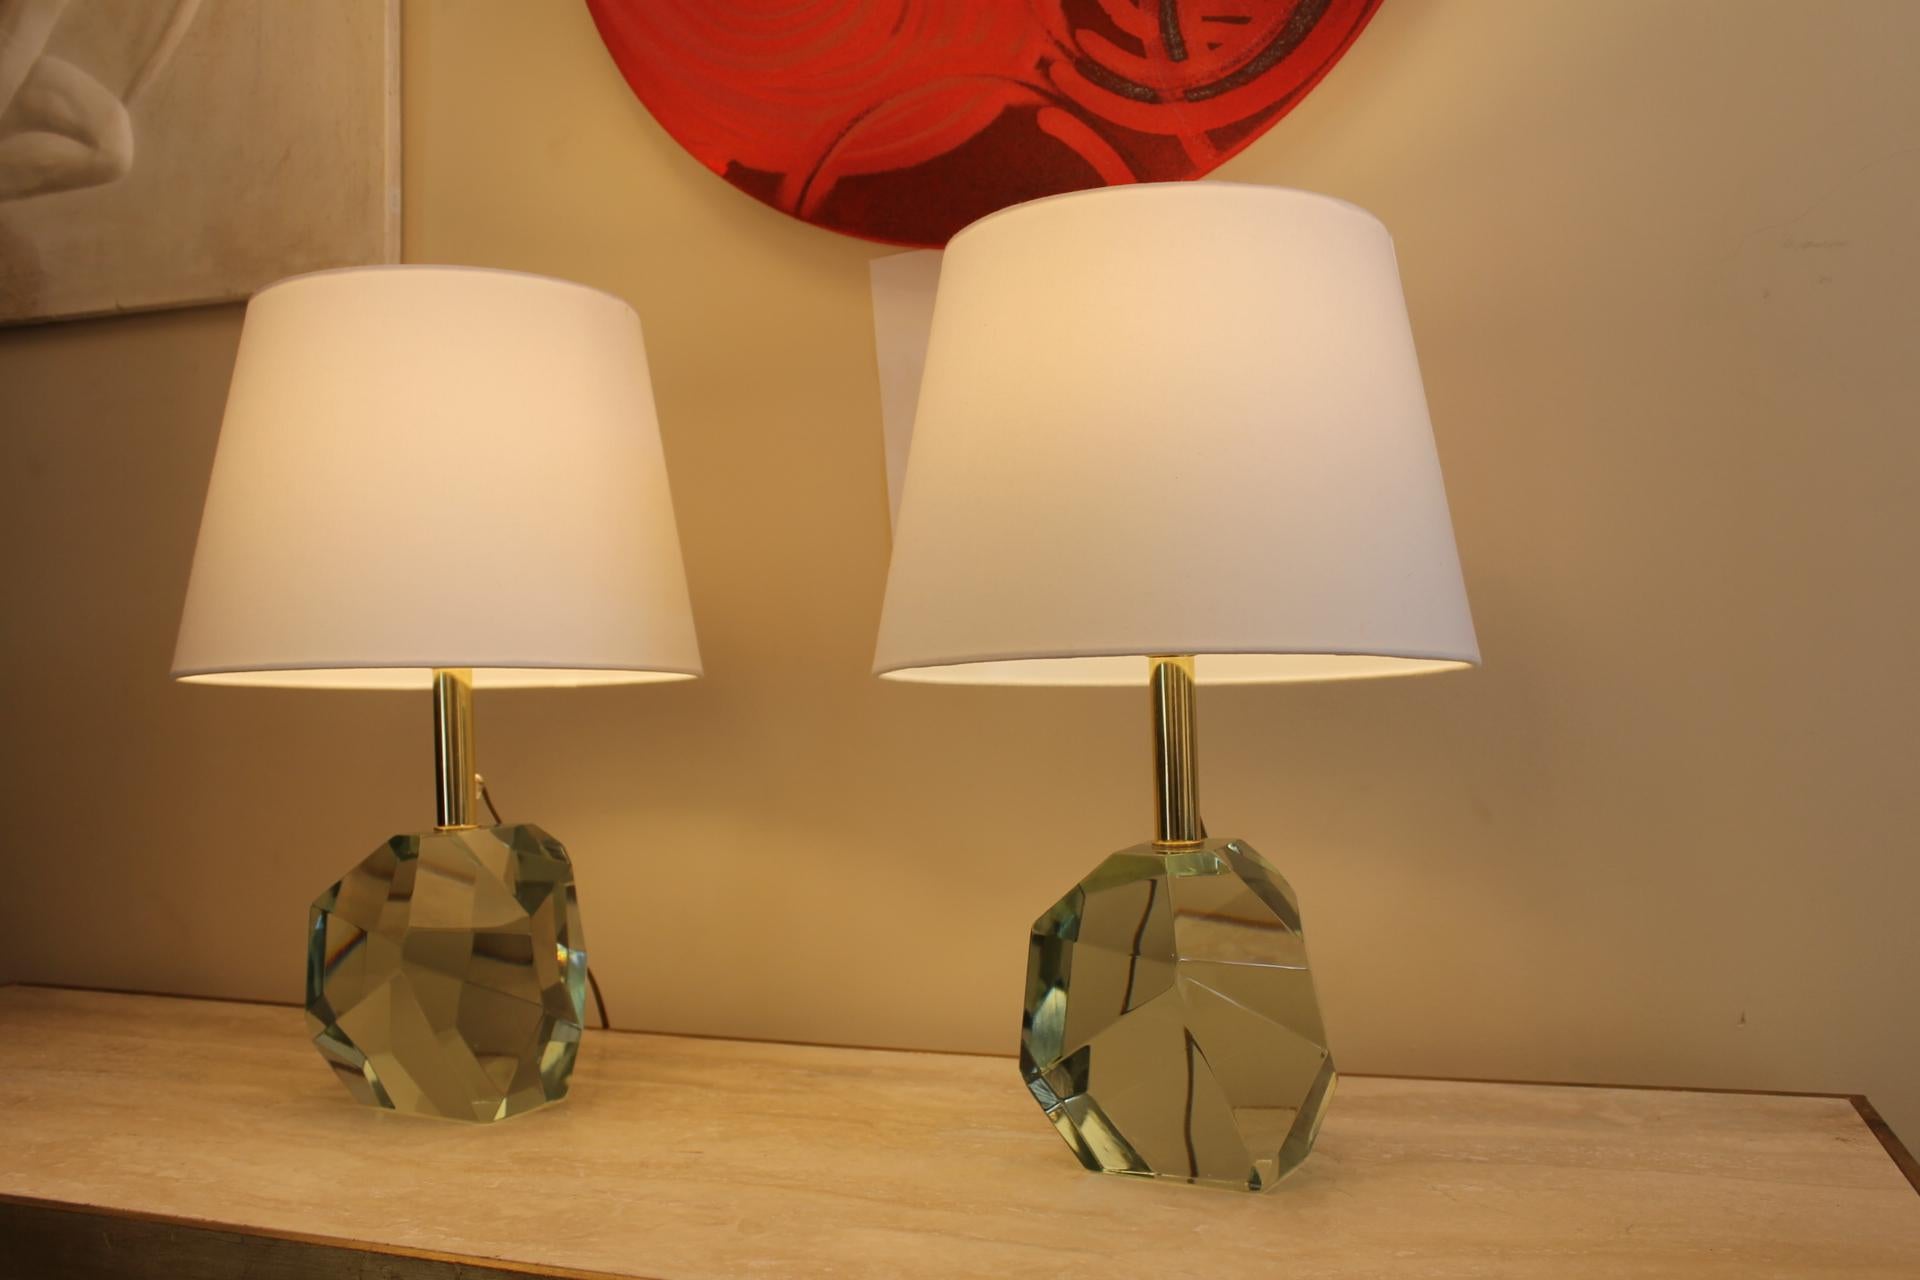 Pair of Lamps, Murano Glass, Pebbles, 20th For Sale 10